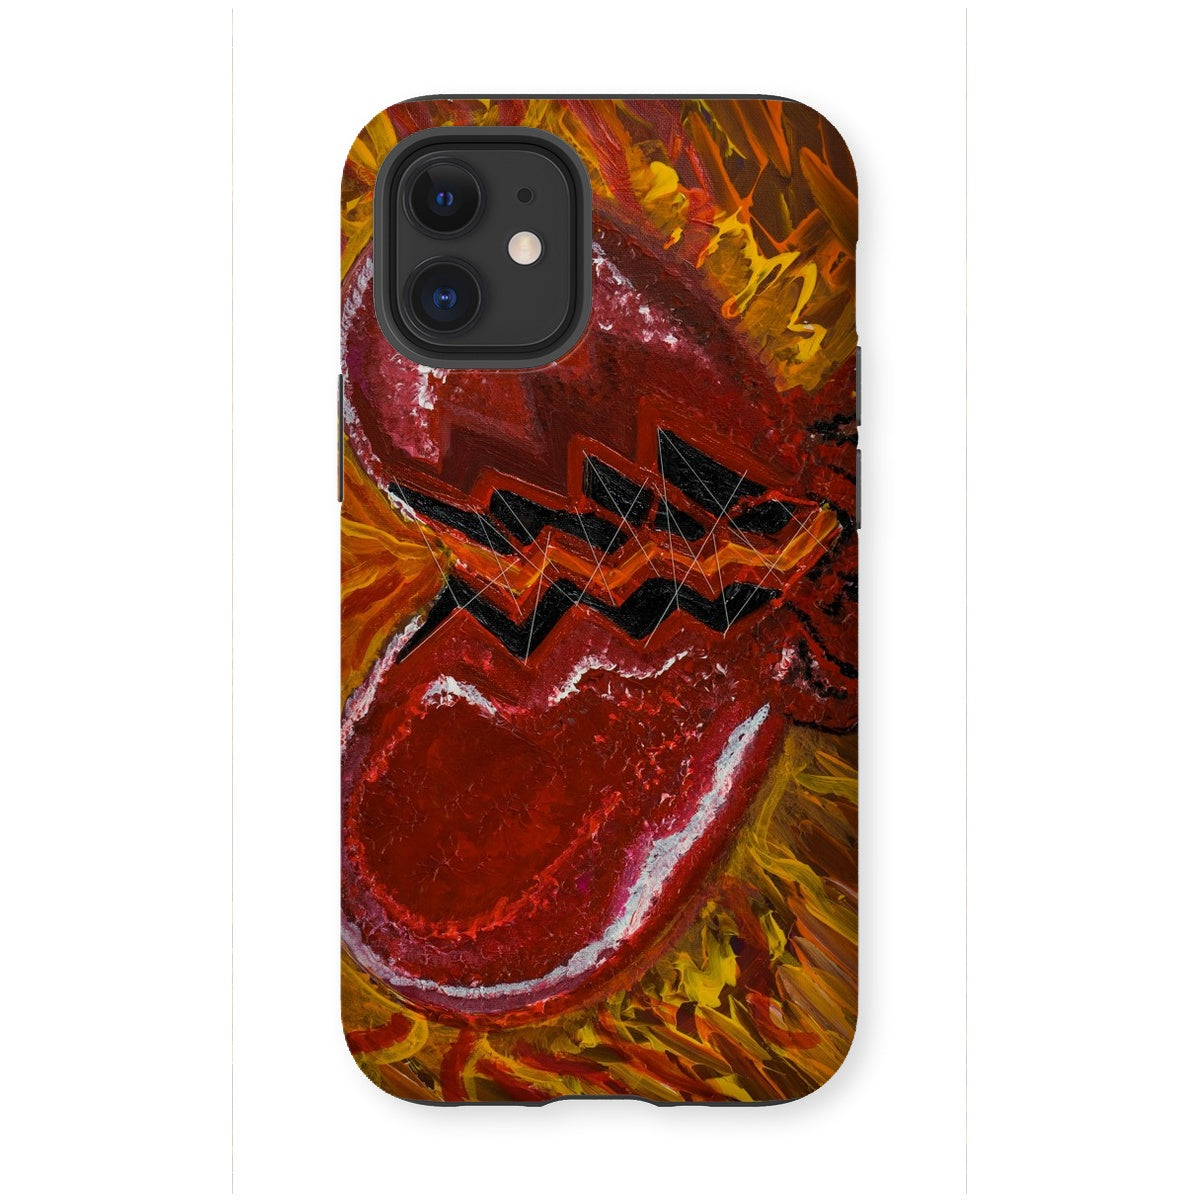 Blood of Hearts Tough Phone Case